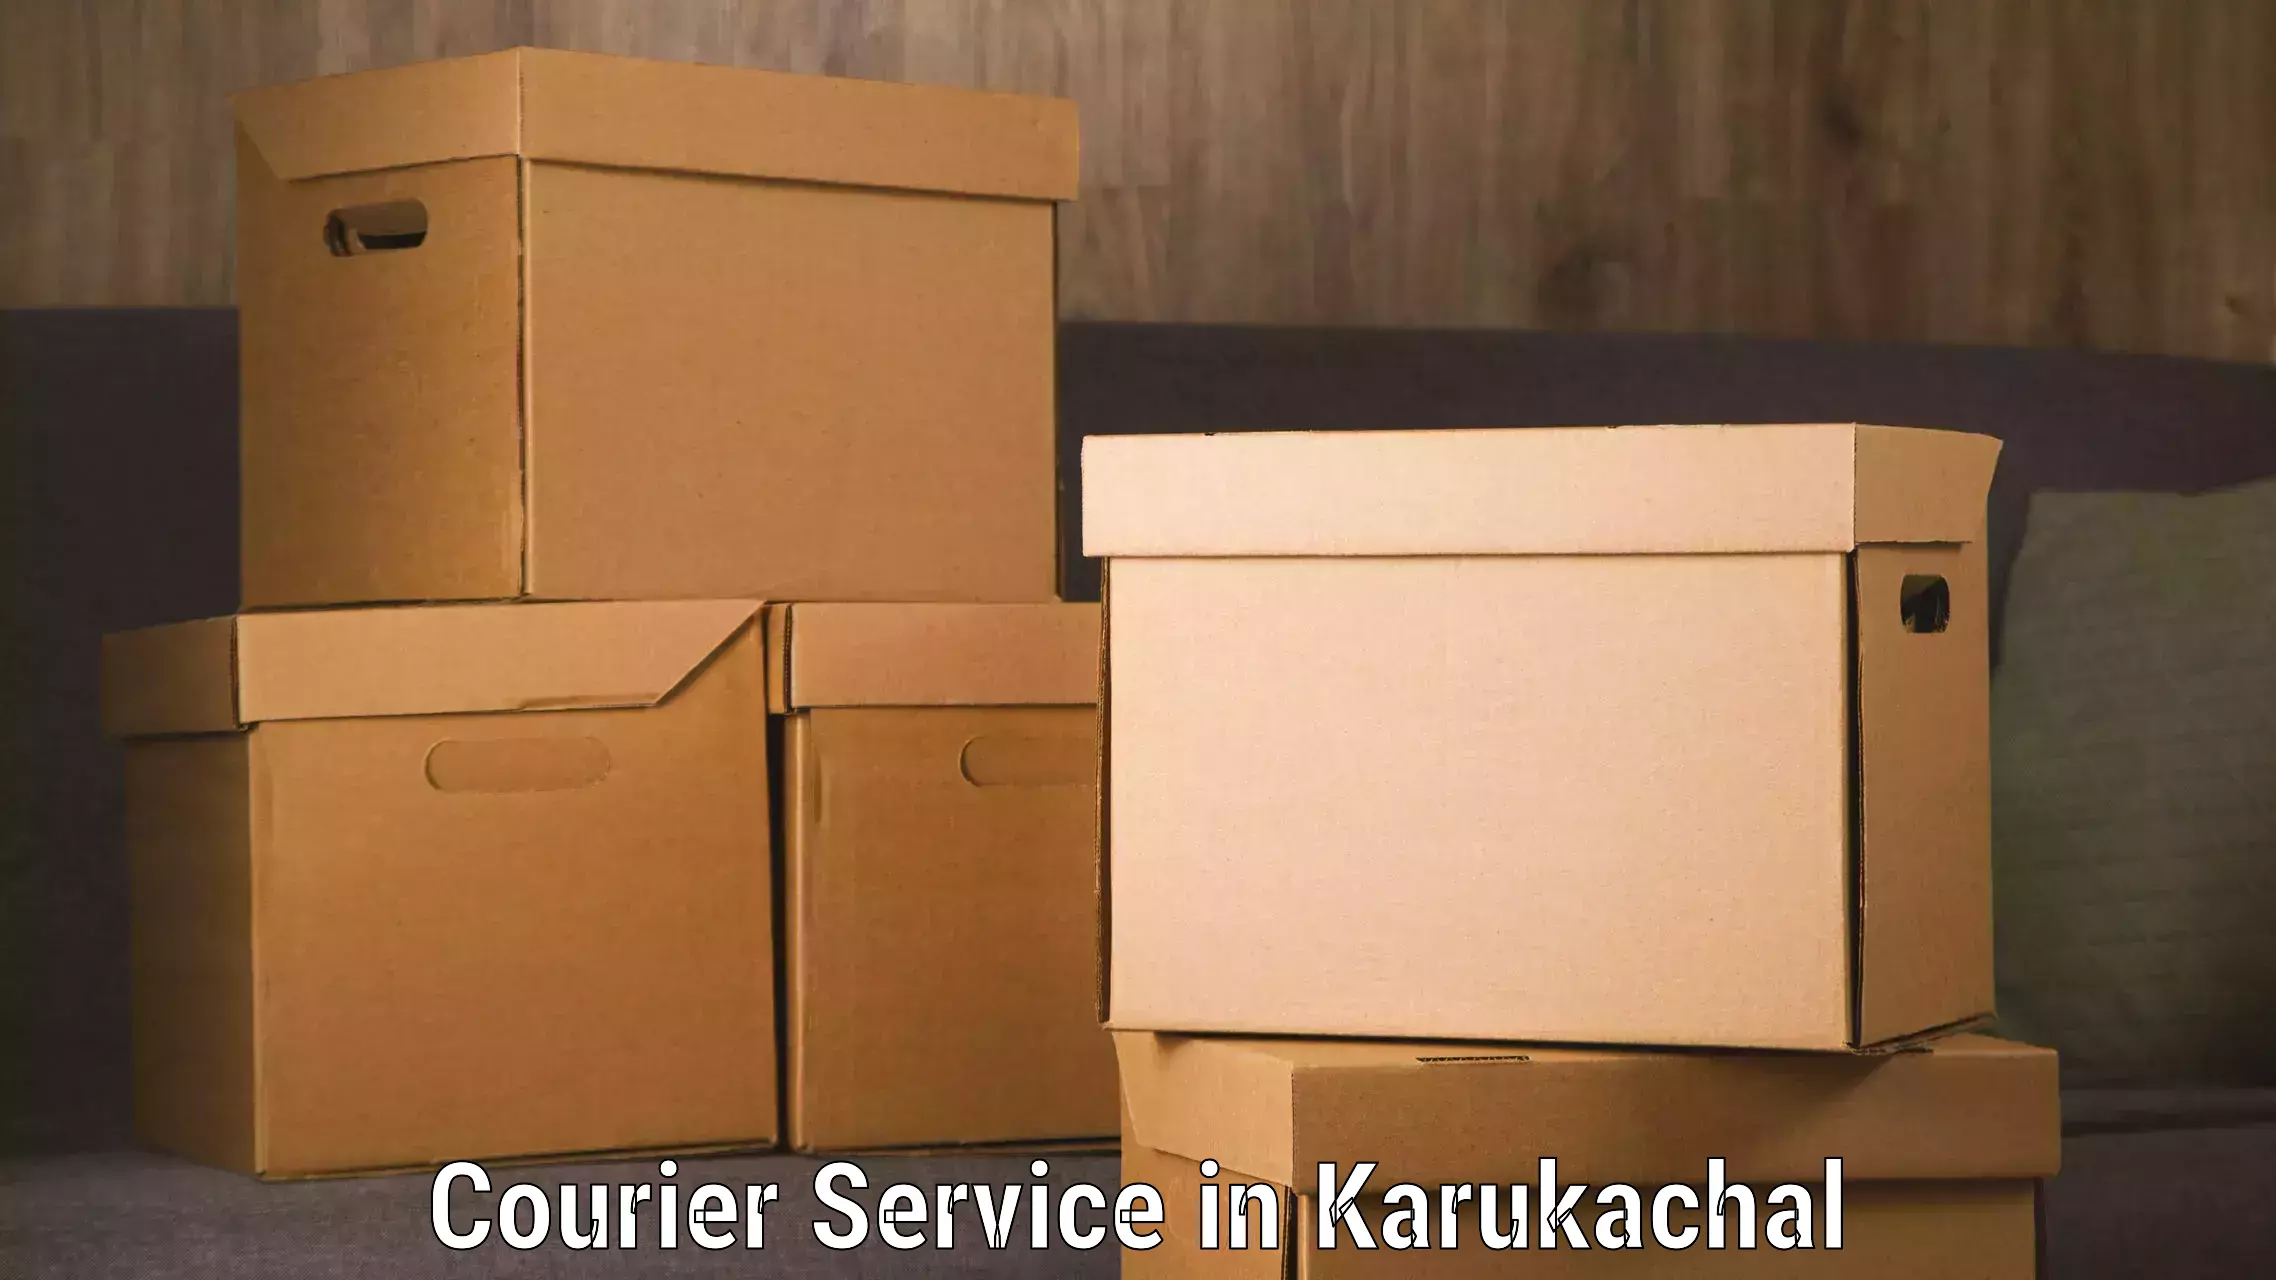 Express delivery capabilities in Karukachal